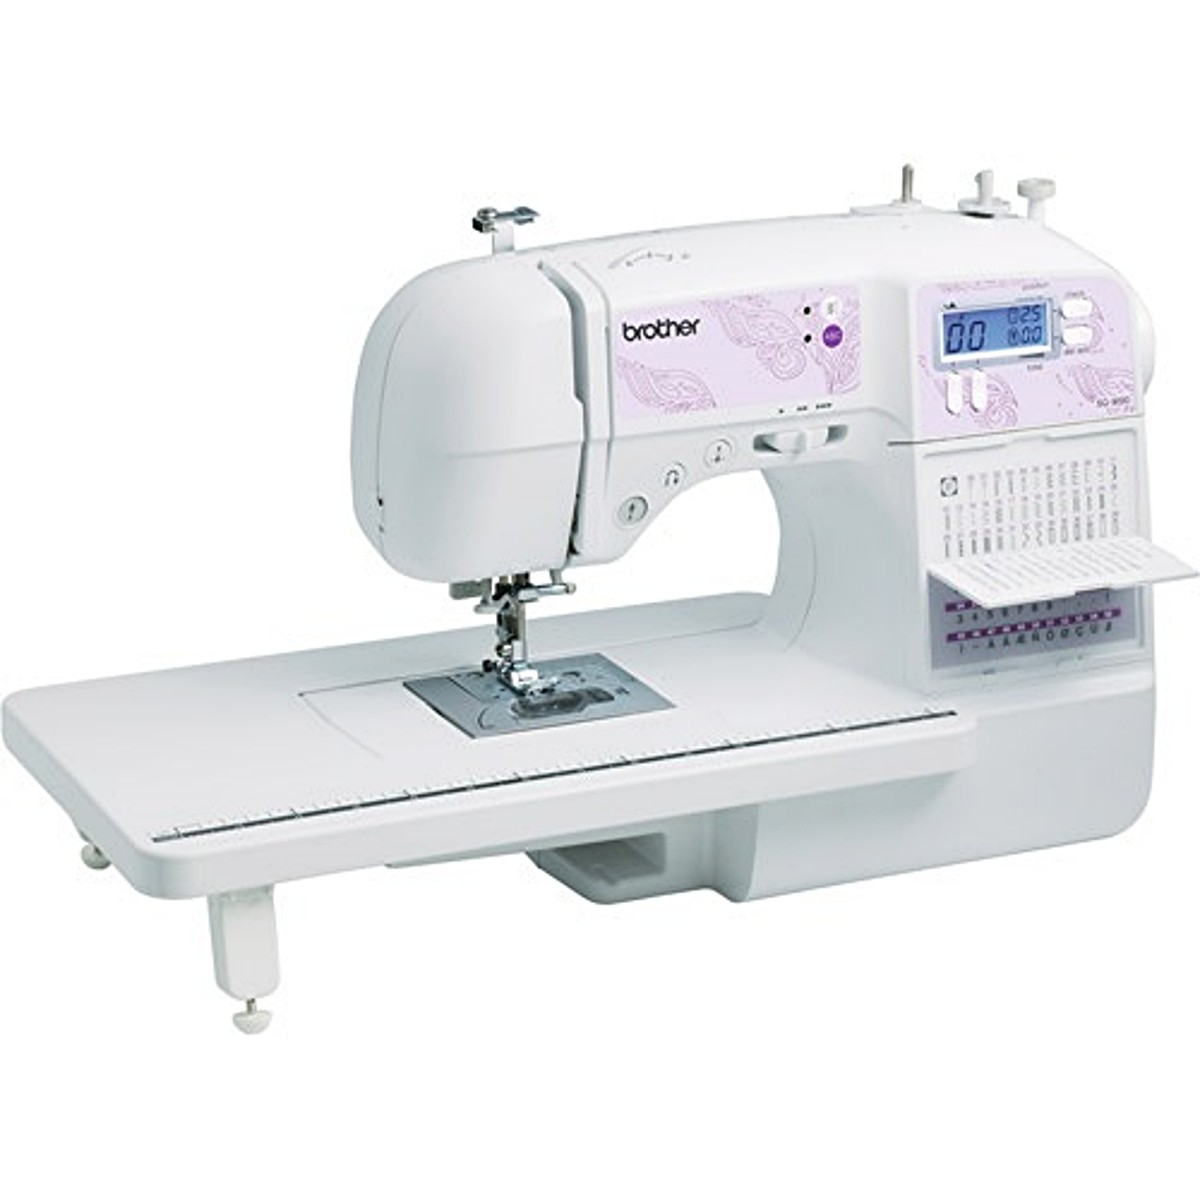 Brother SQ9000 Sewing Machine Review